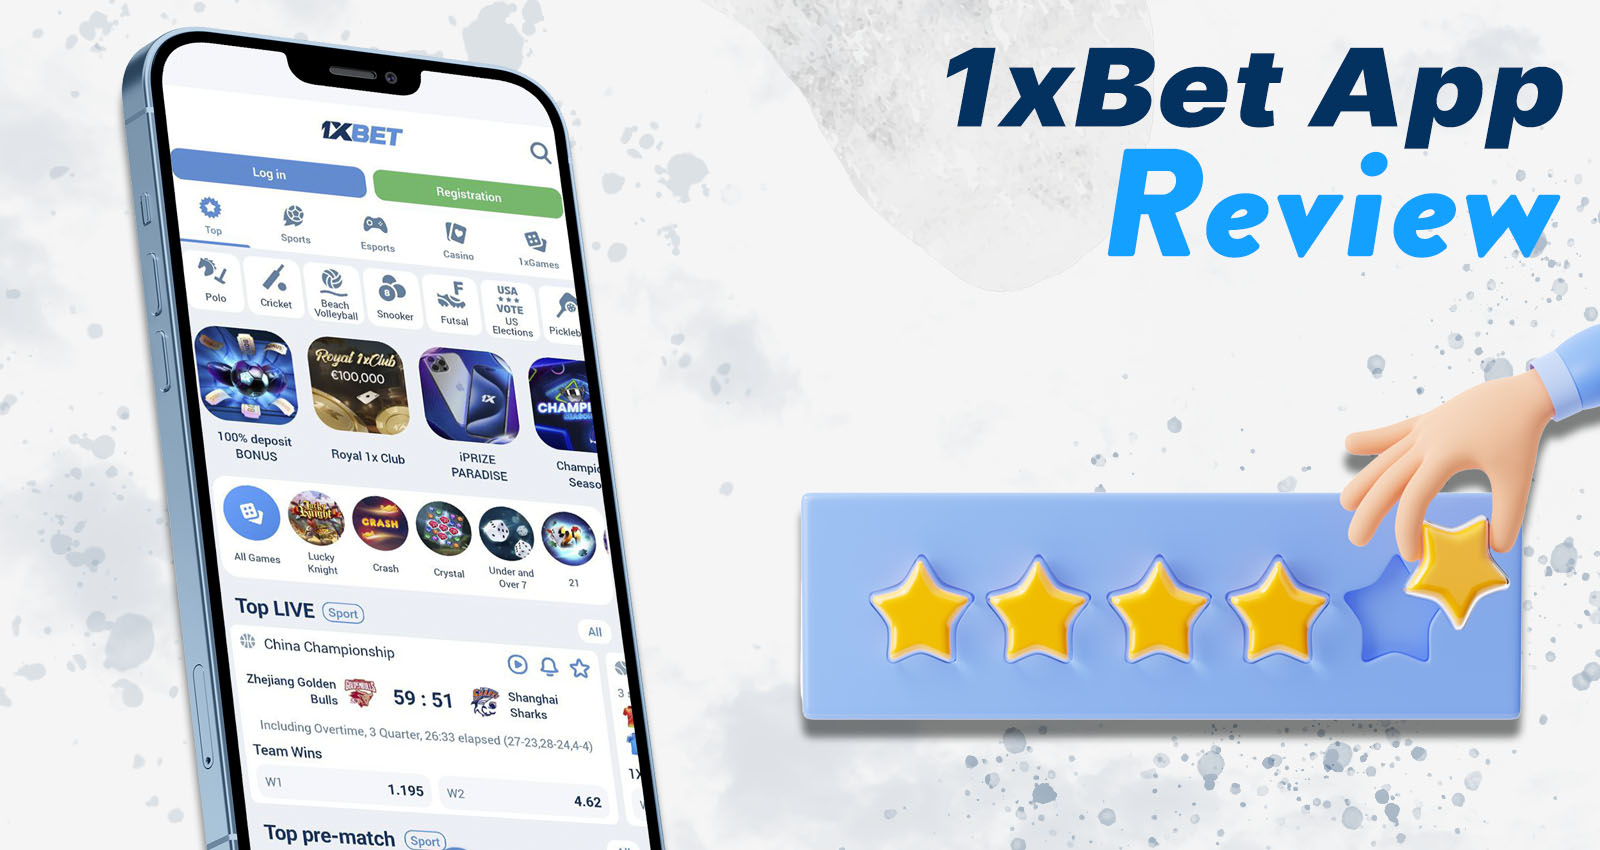 The 1xBet app is a platform for sports betting and casino games on the go